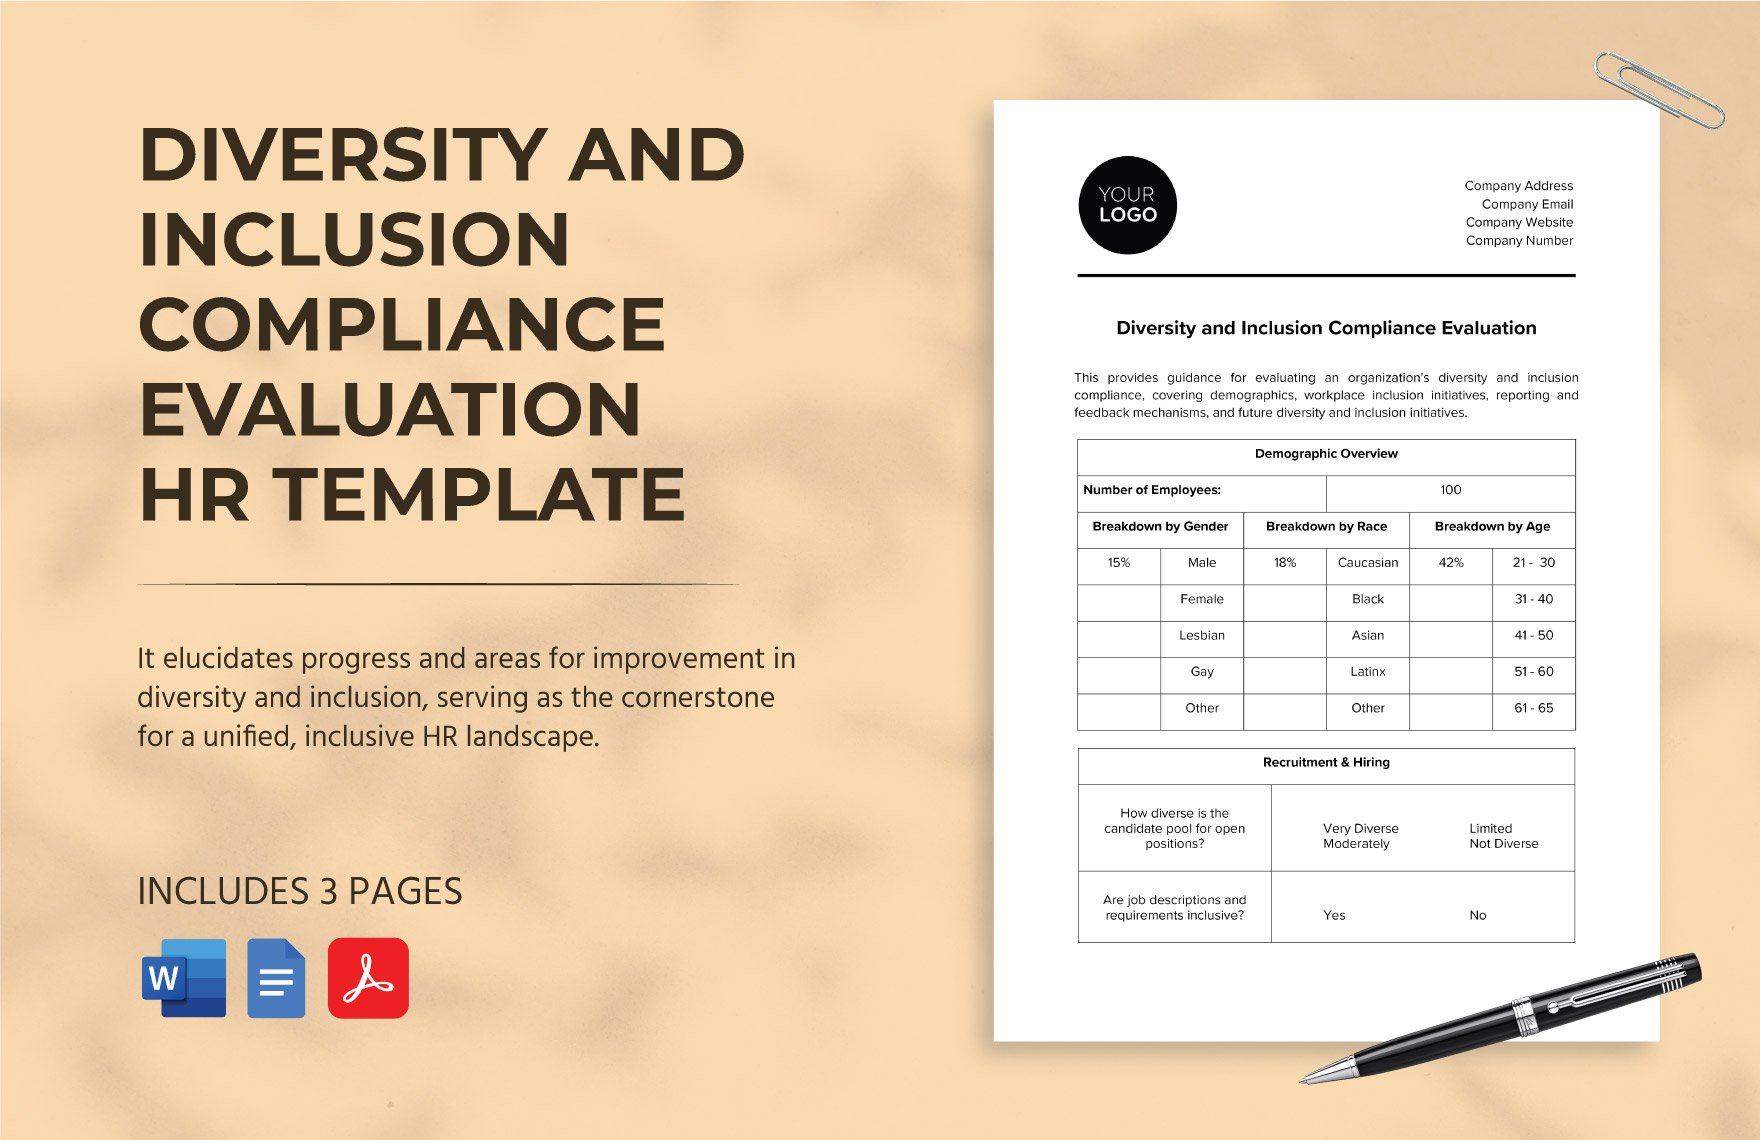 Diversity and Inclusion Compliance Evaluation HR Template